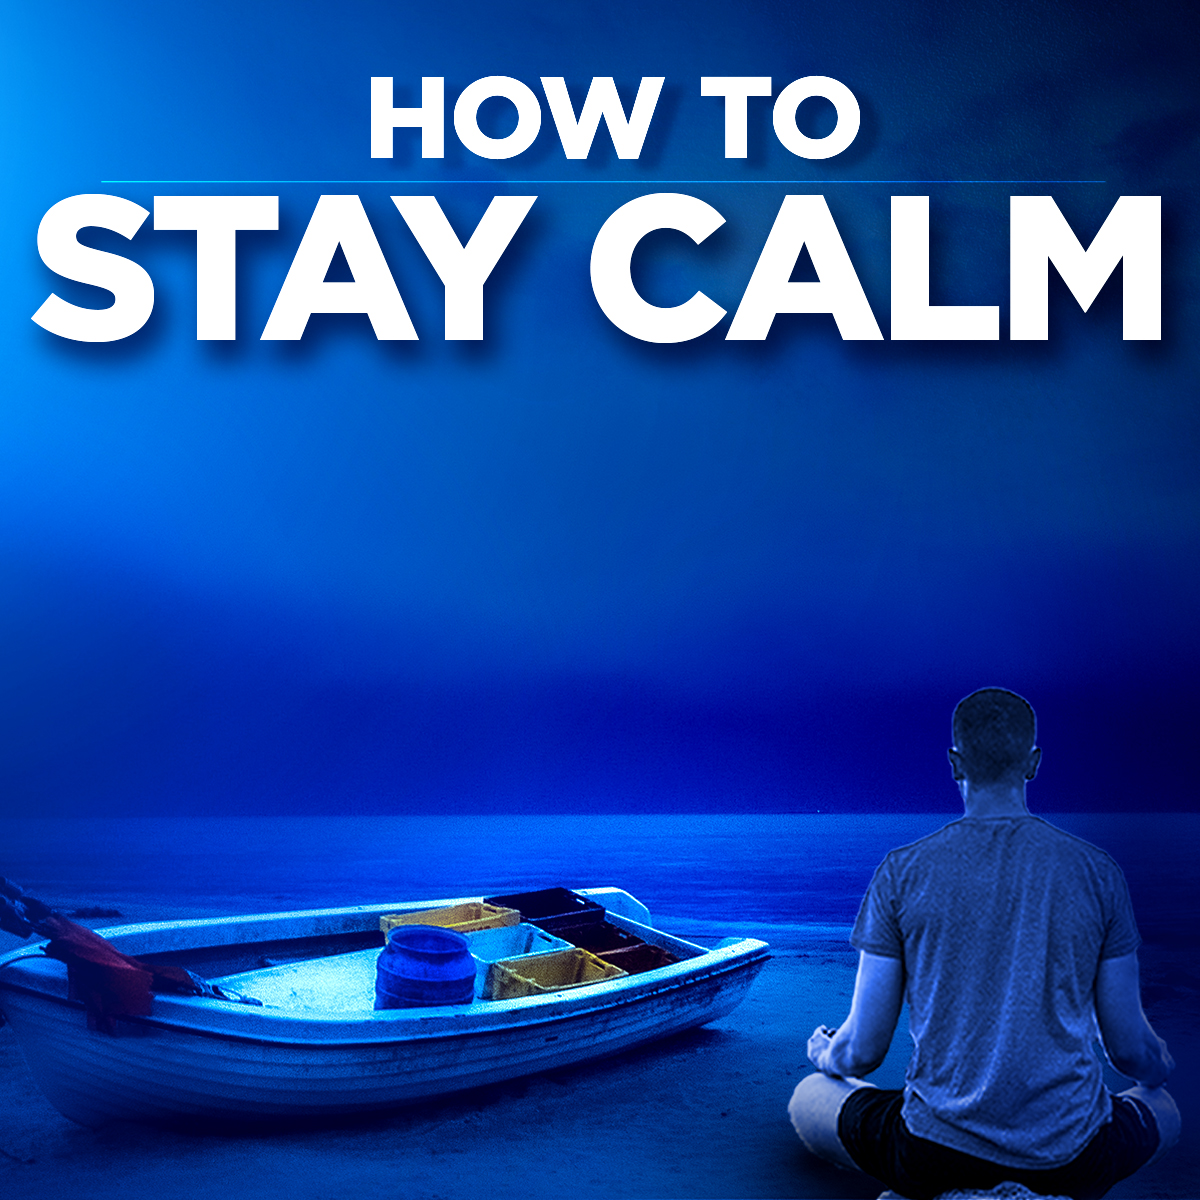 How to Stay Calm